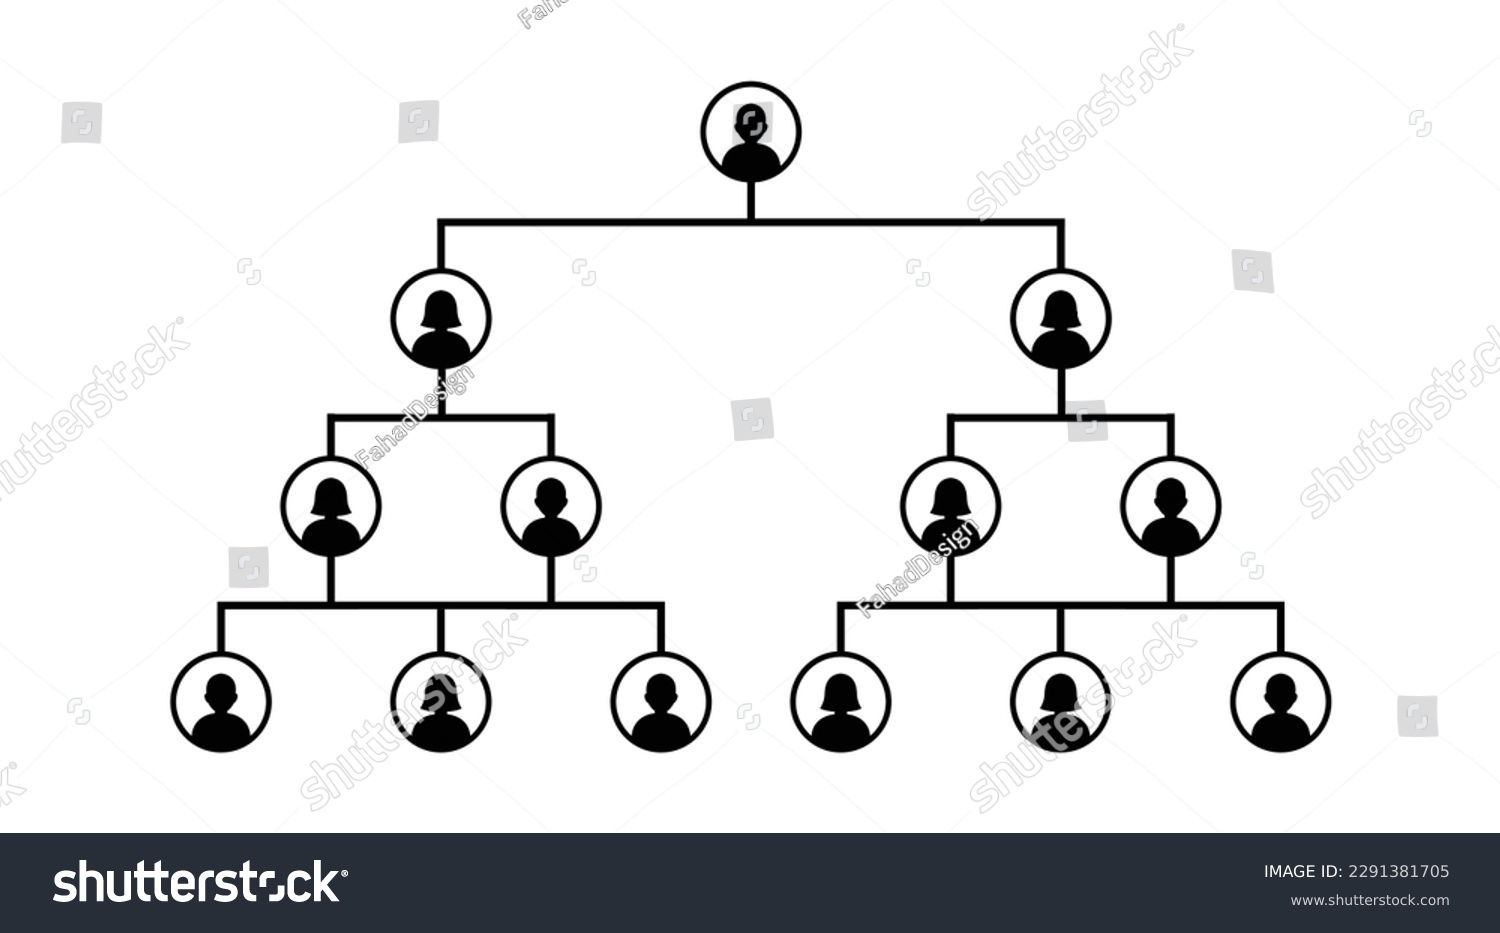 Family tree: a tree chart representing family relationship #2291381705